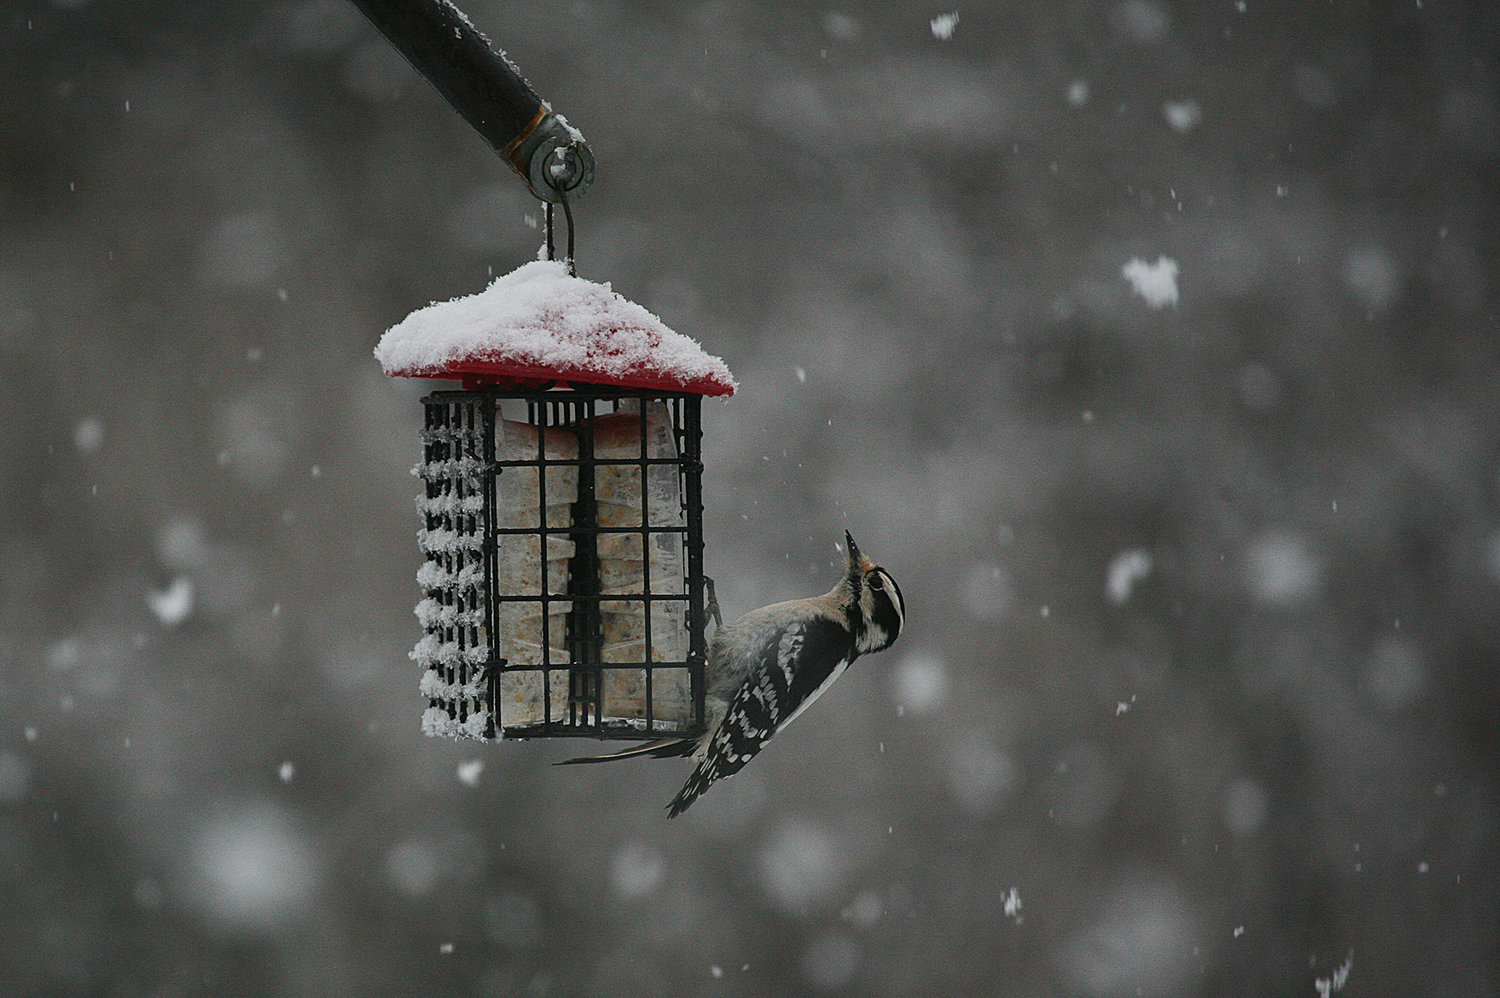 WINTER SCENES -- February 7, 2021 -- A woodpecker feasts at a feeder during Sunday's snow storm. Photo by Ray K. Saunders